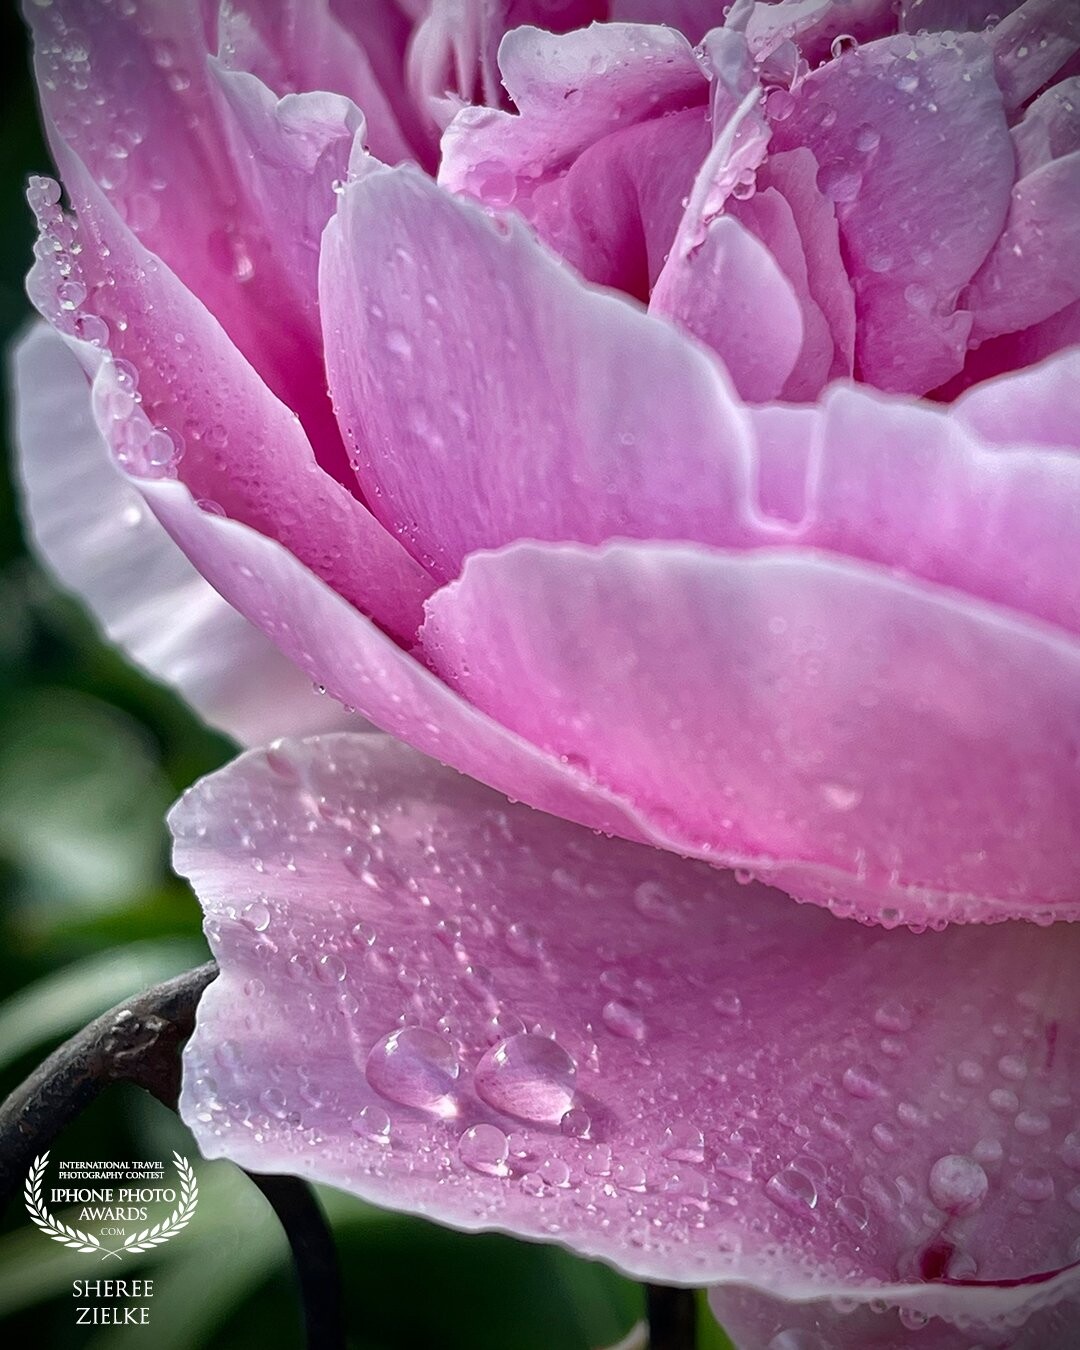 My peonies were not abundant this year, but the bush did create this glorious pink bloom. I love the 12ProMax ability to do close-up focus. And rain drops are always a fave. Even if created with a spray bottle.